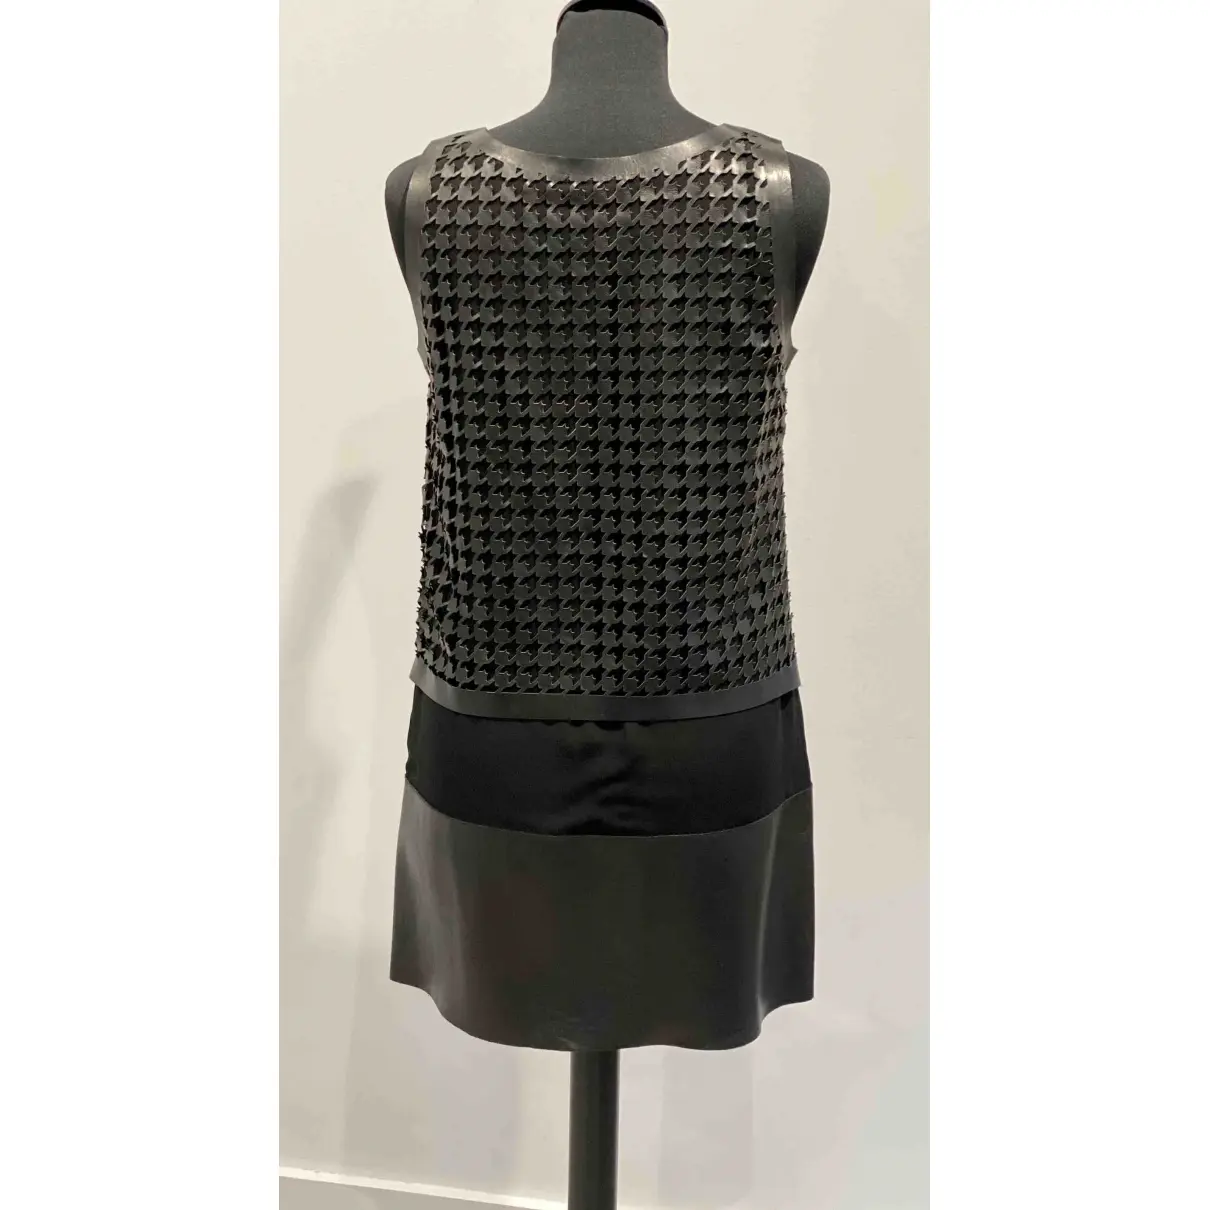 Buy Check 1 Leather mini dress online